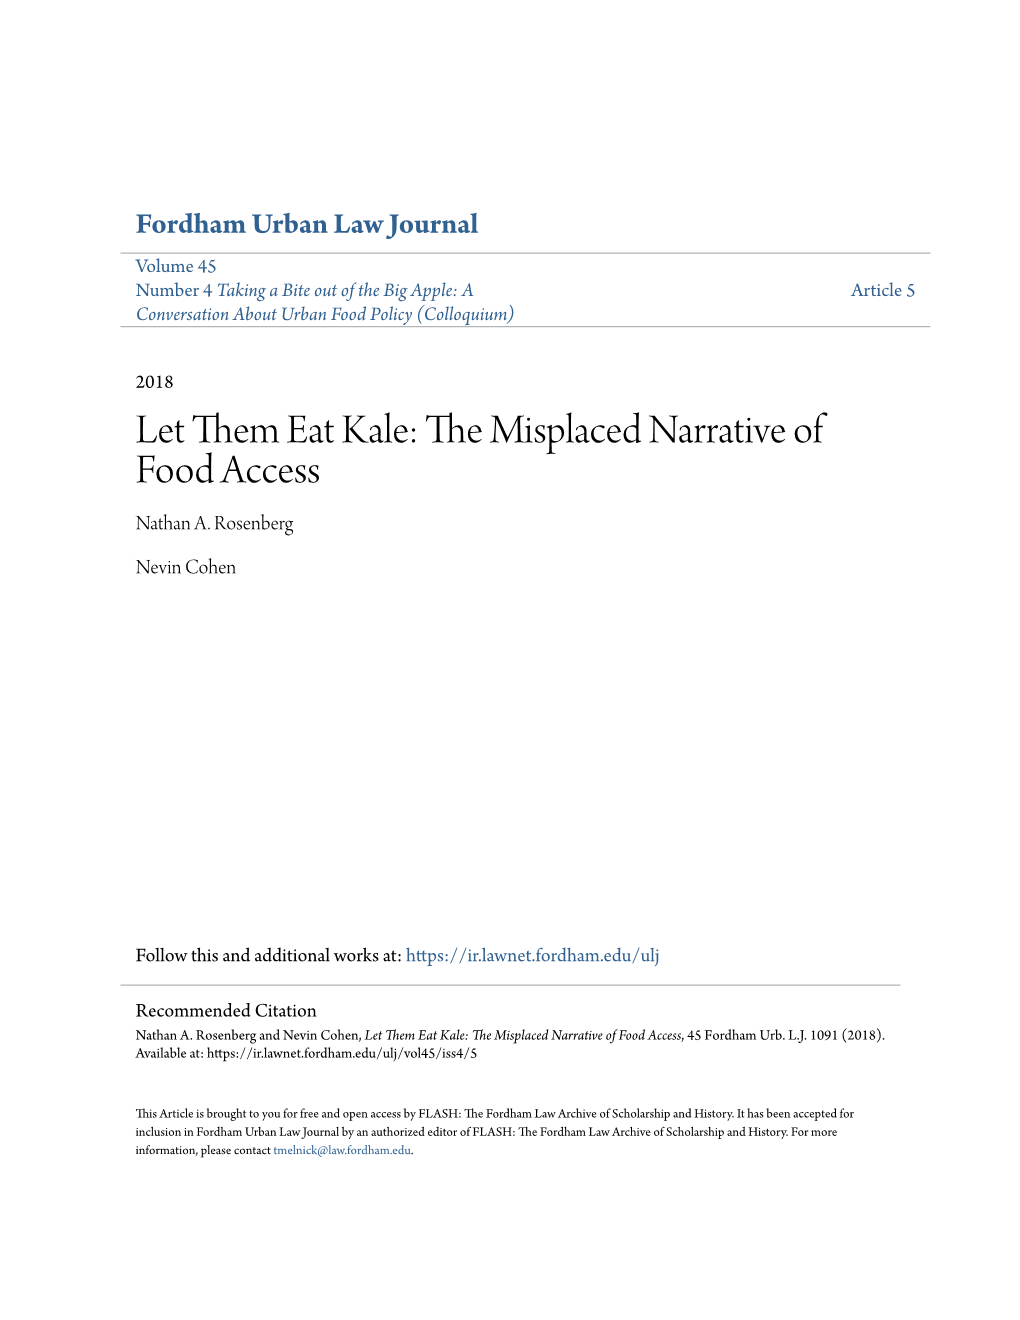 Let Them Eat Kale: the Misplaced Narrative of Food Access, 45 Fordham Urb